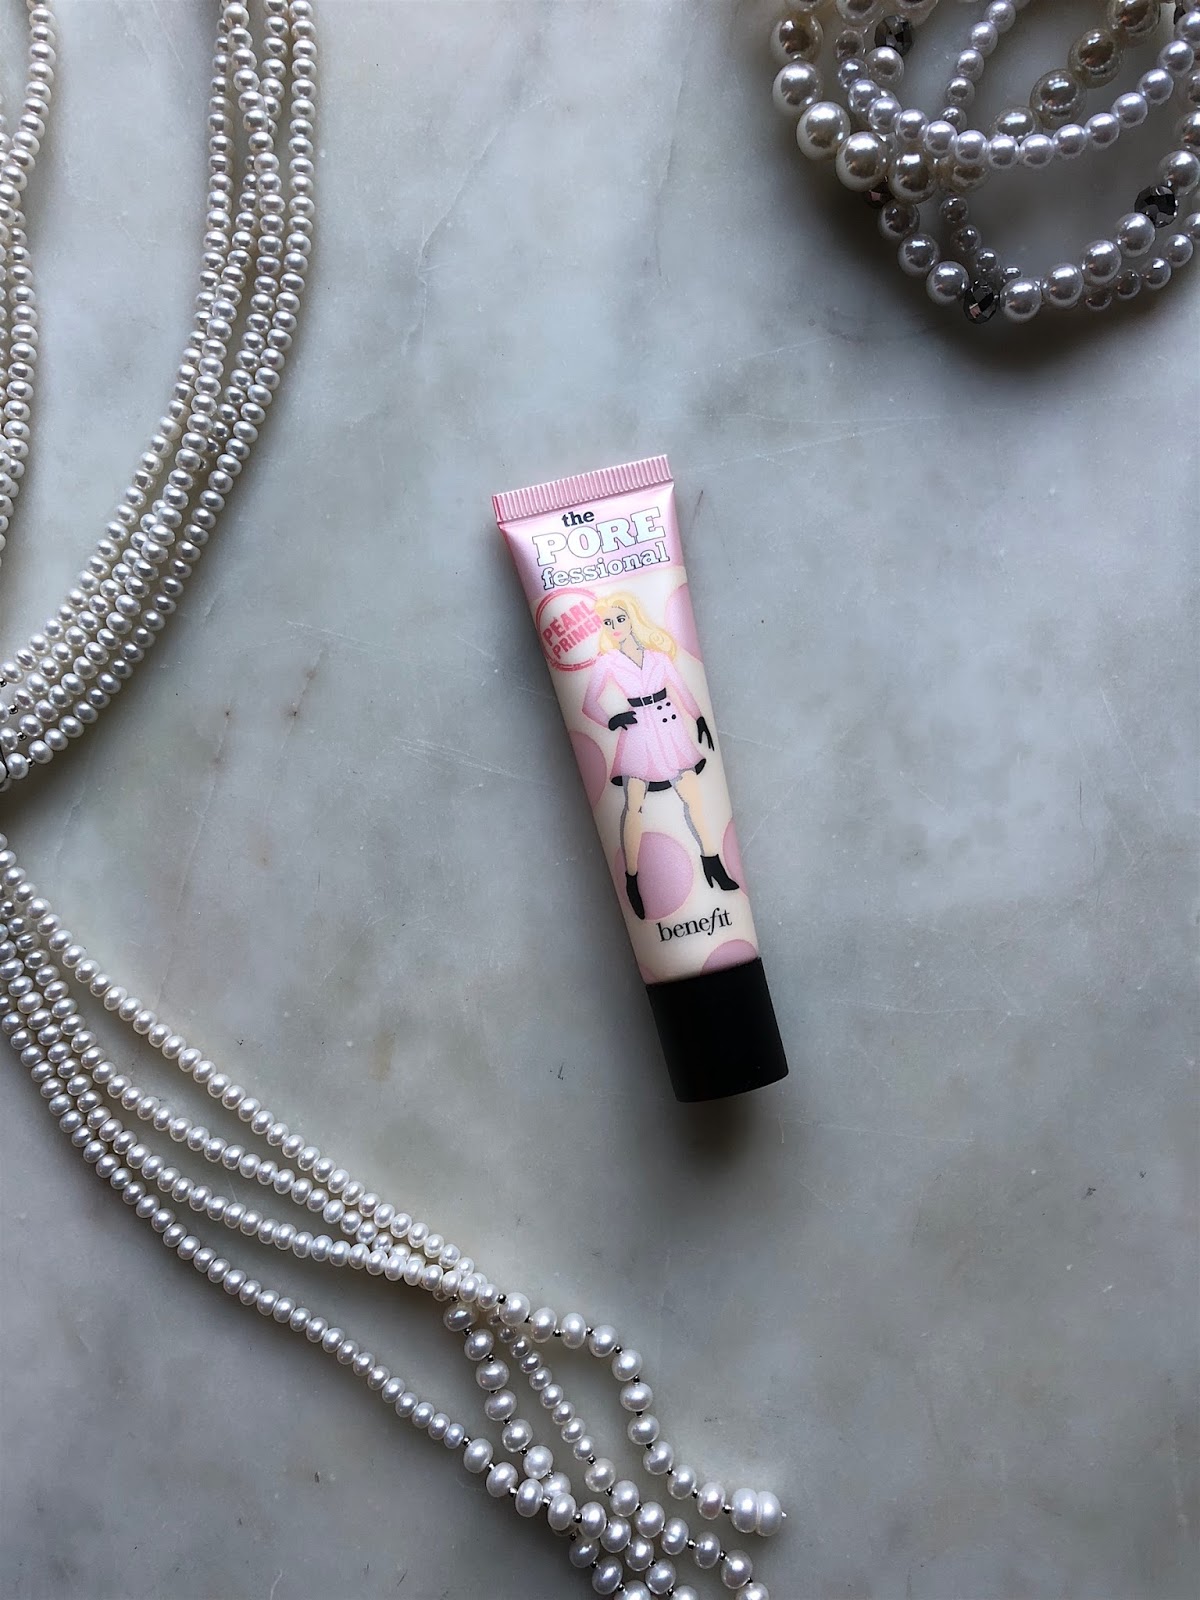 Benefit The POREfessional Pearl Primer: A quick review